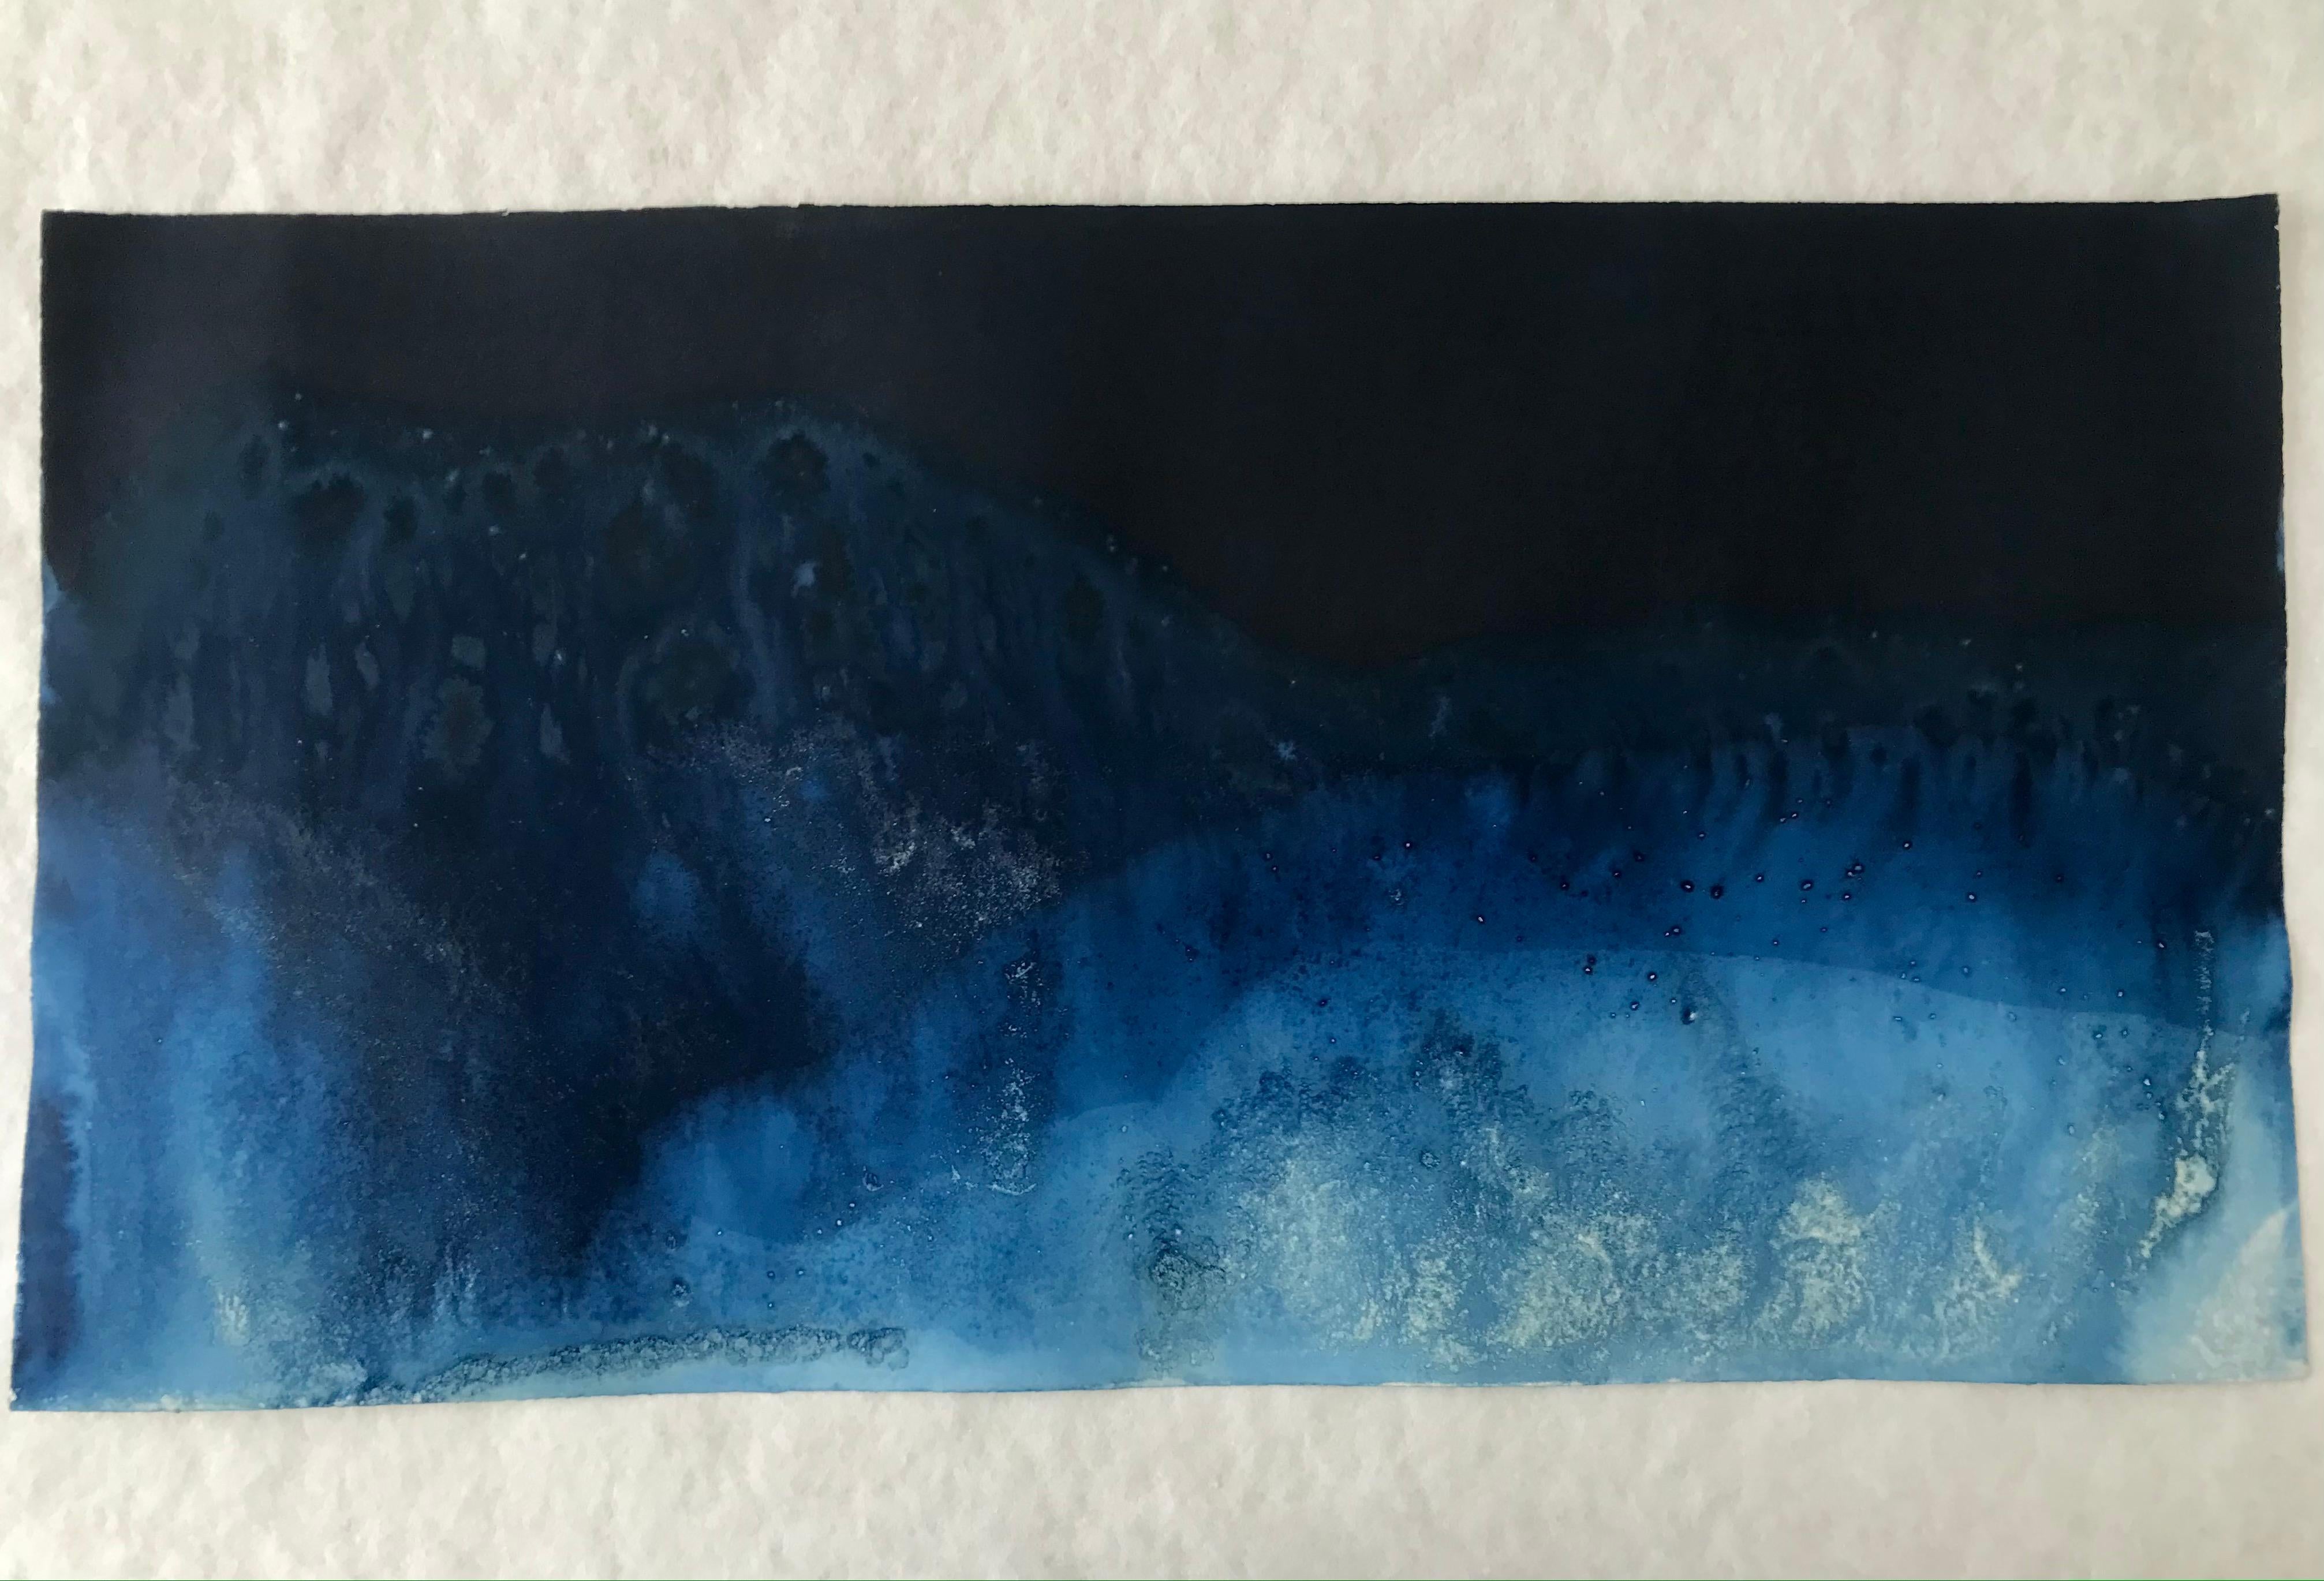 28° 14' 22.942'' N, 114° 6' 4.129'' W-5. Cyanotype photograph of the ocean waves - Photograph by Paola Davila